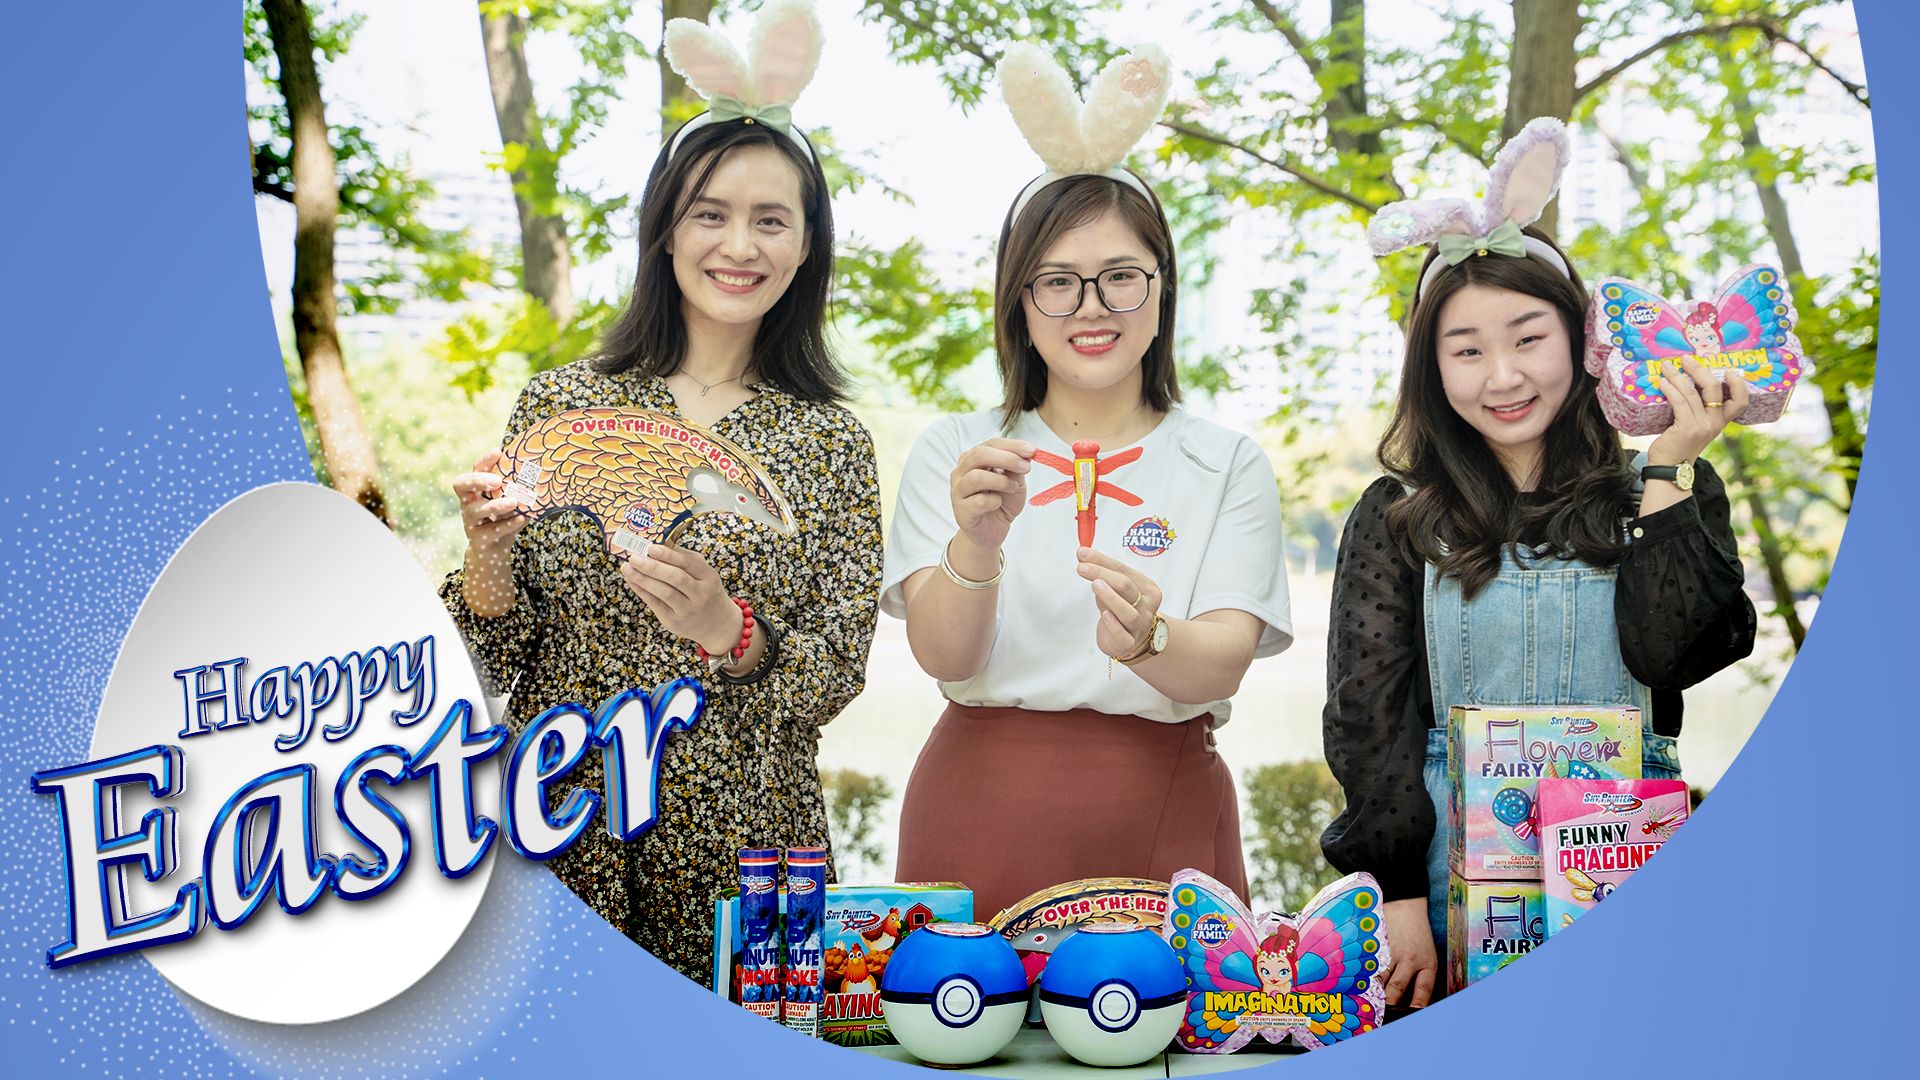 Have fun with Fireworks for Easter, which item you like best? #fireworks #firework #Easter